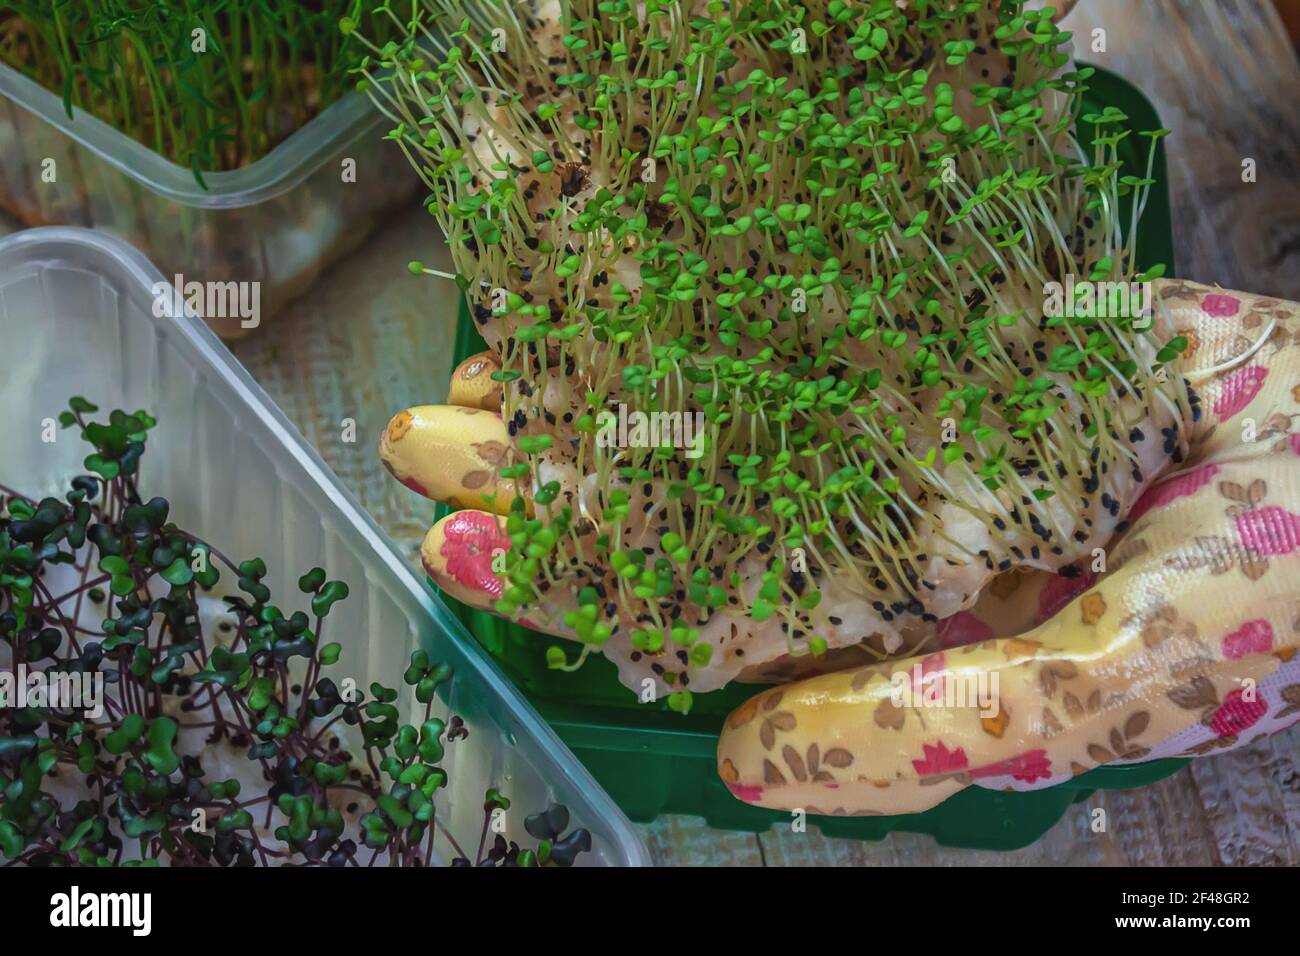 Microgreen sprouts in hands. Nature. Selective focus. Stock Photo